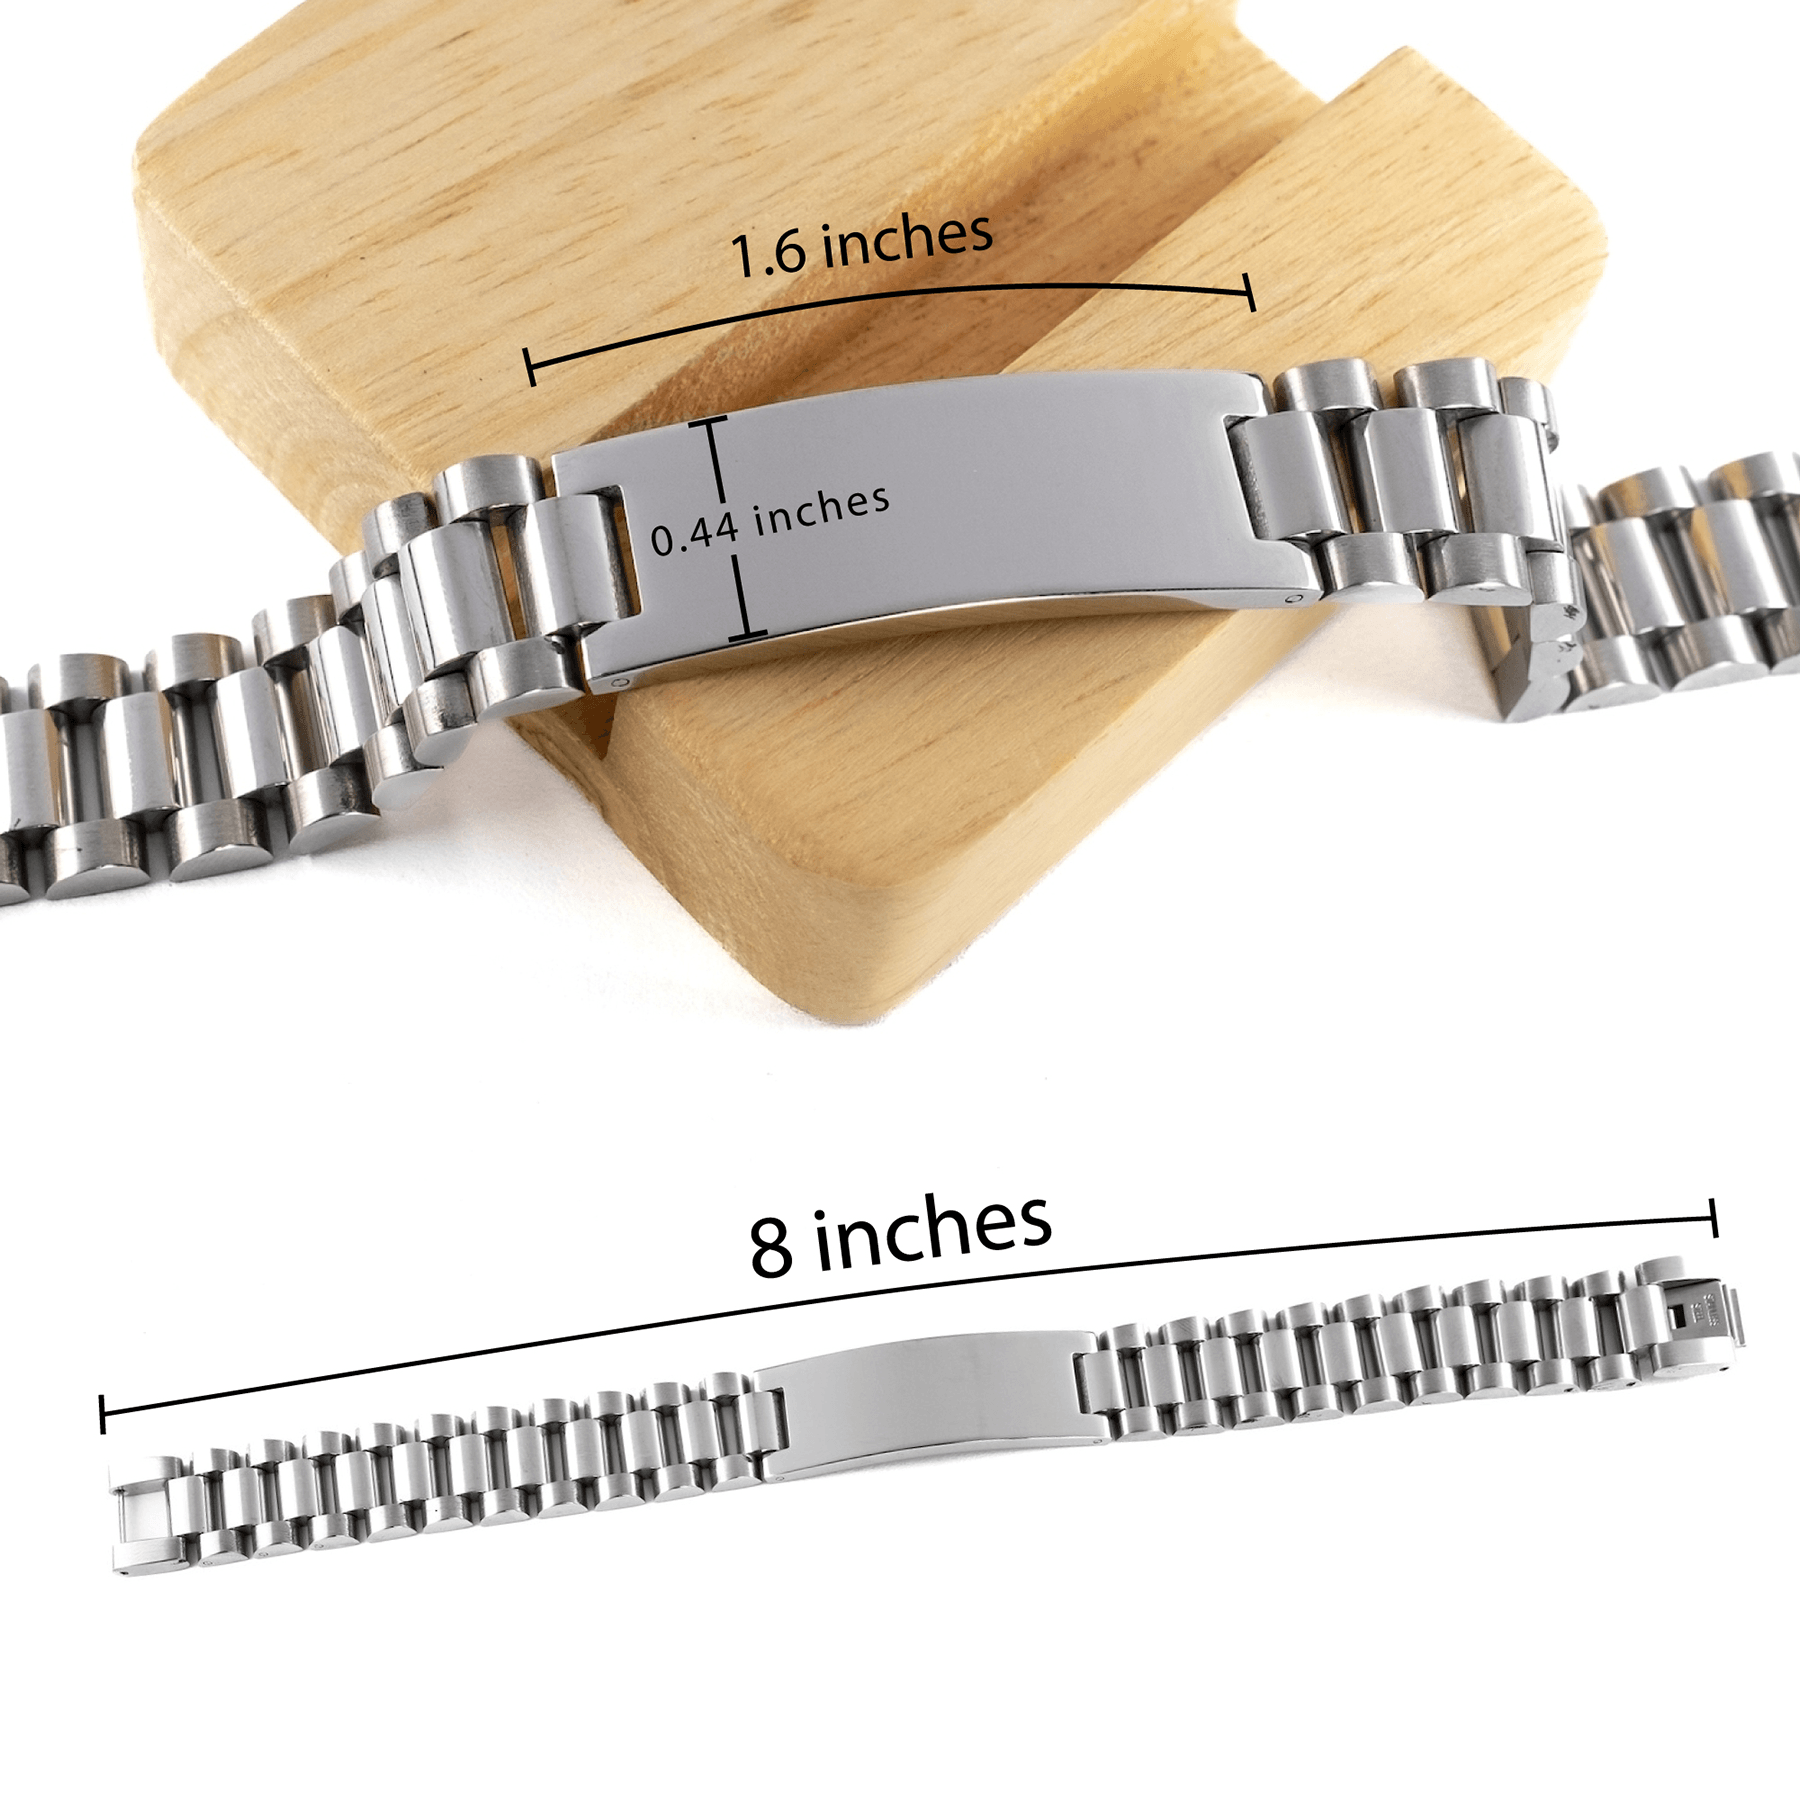 Remarkable Computer Programmer Gifts, Your dedication and hard work, Inspirational Birthday Christmas Unique Ladder Stainless Steel Bracelet For Computer Programmer, Coworkers, Men, Women, Friends - Mallard Moon Gift Shop